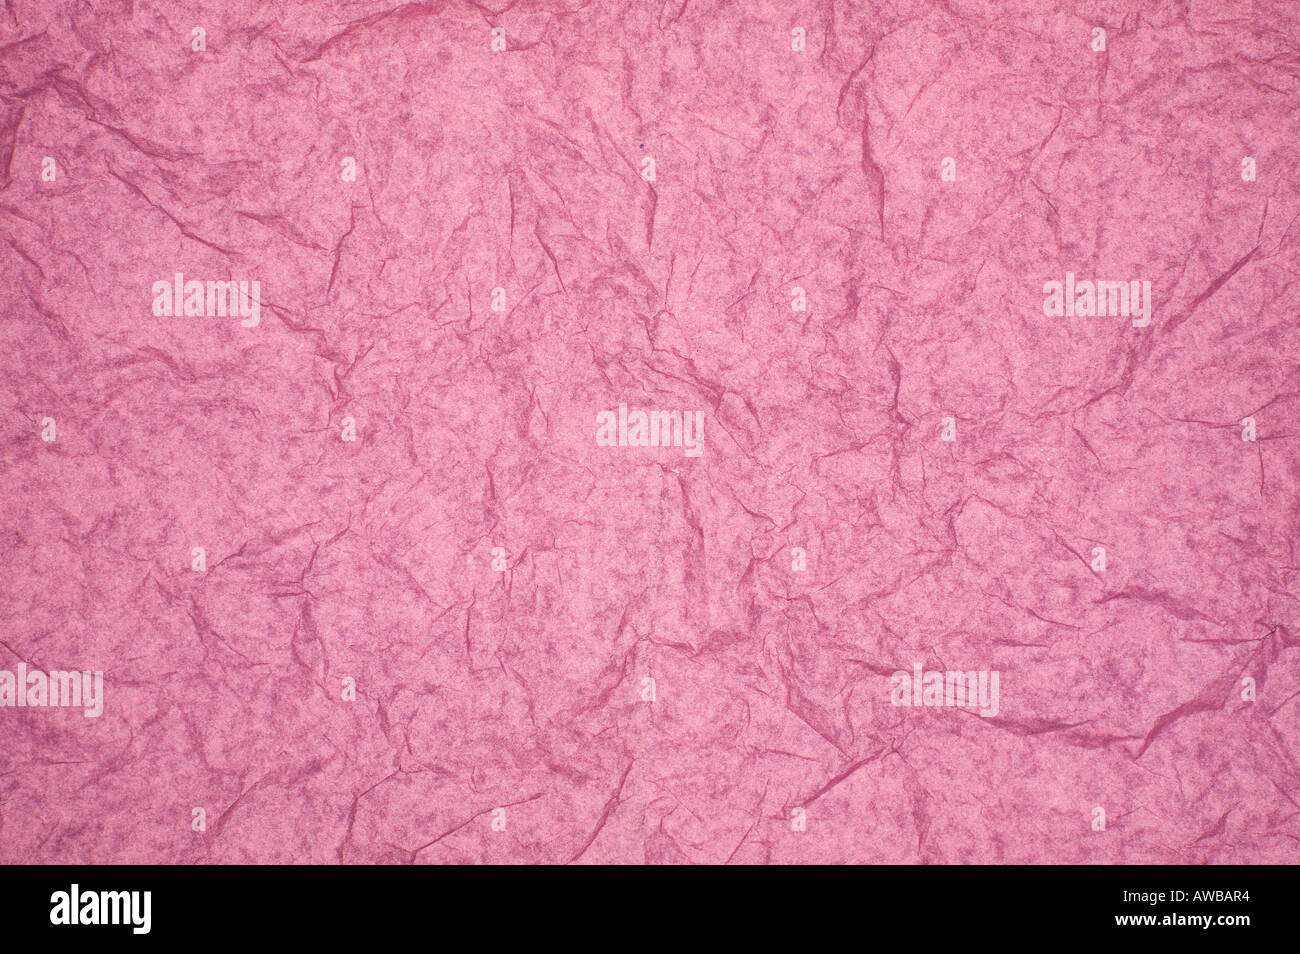 ABSTRACT RANDOM BACKGROUND OF CREASED CRUMPLED PALE PINK TISSUE PAPER Stock Photo